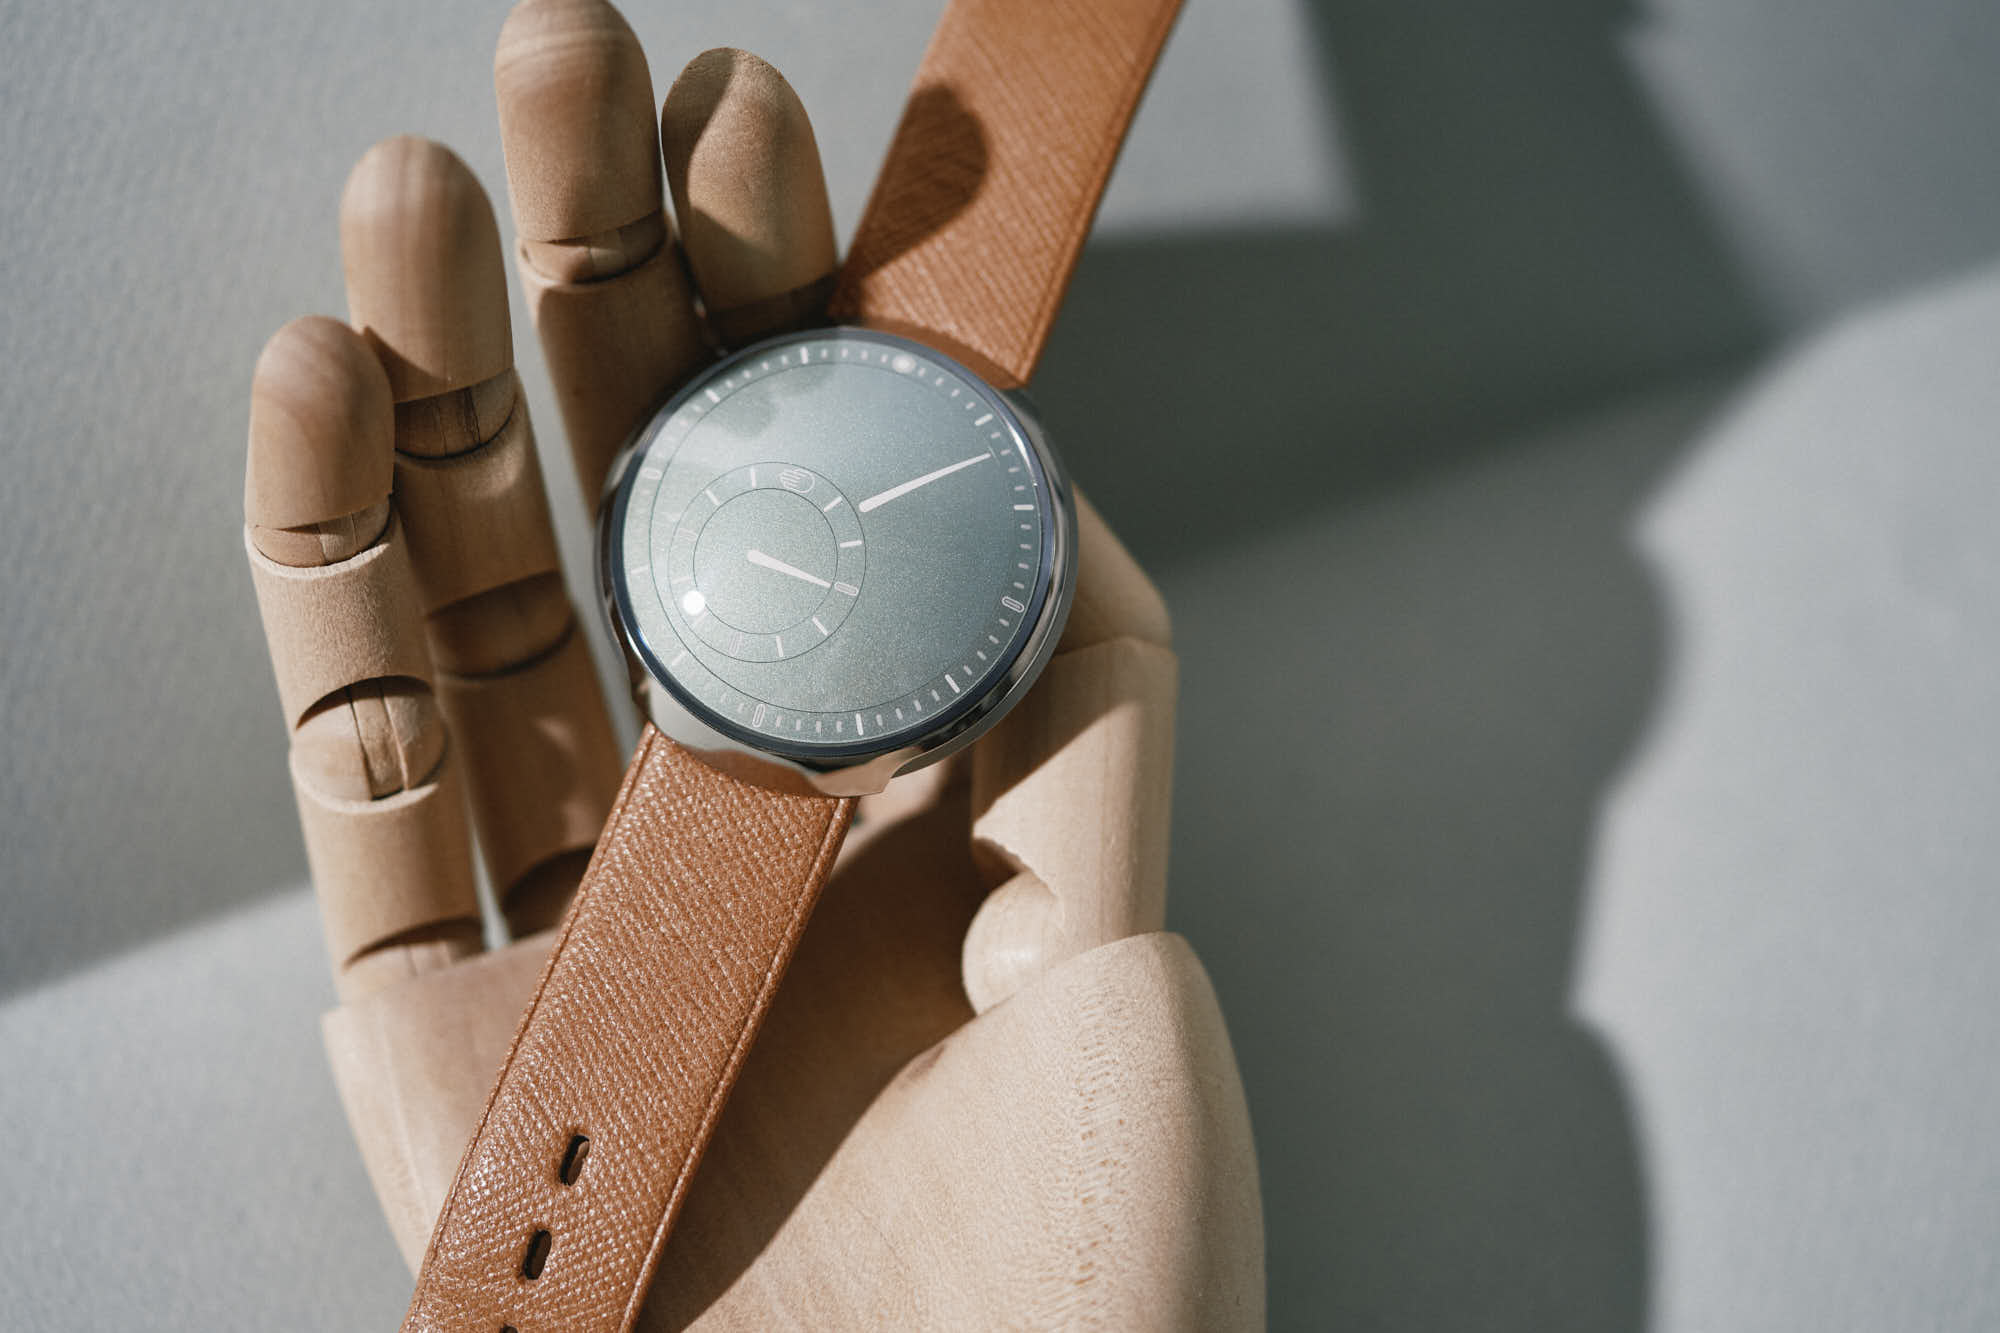 Wear OS' black mandate continues tech's minimalism obsession